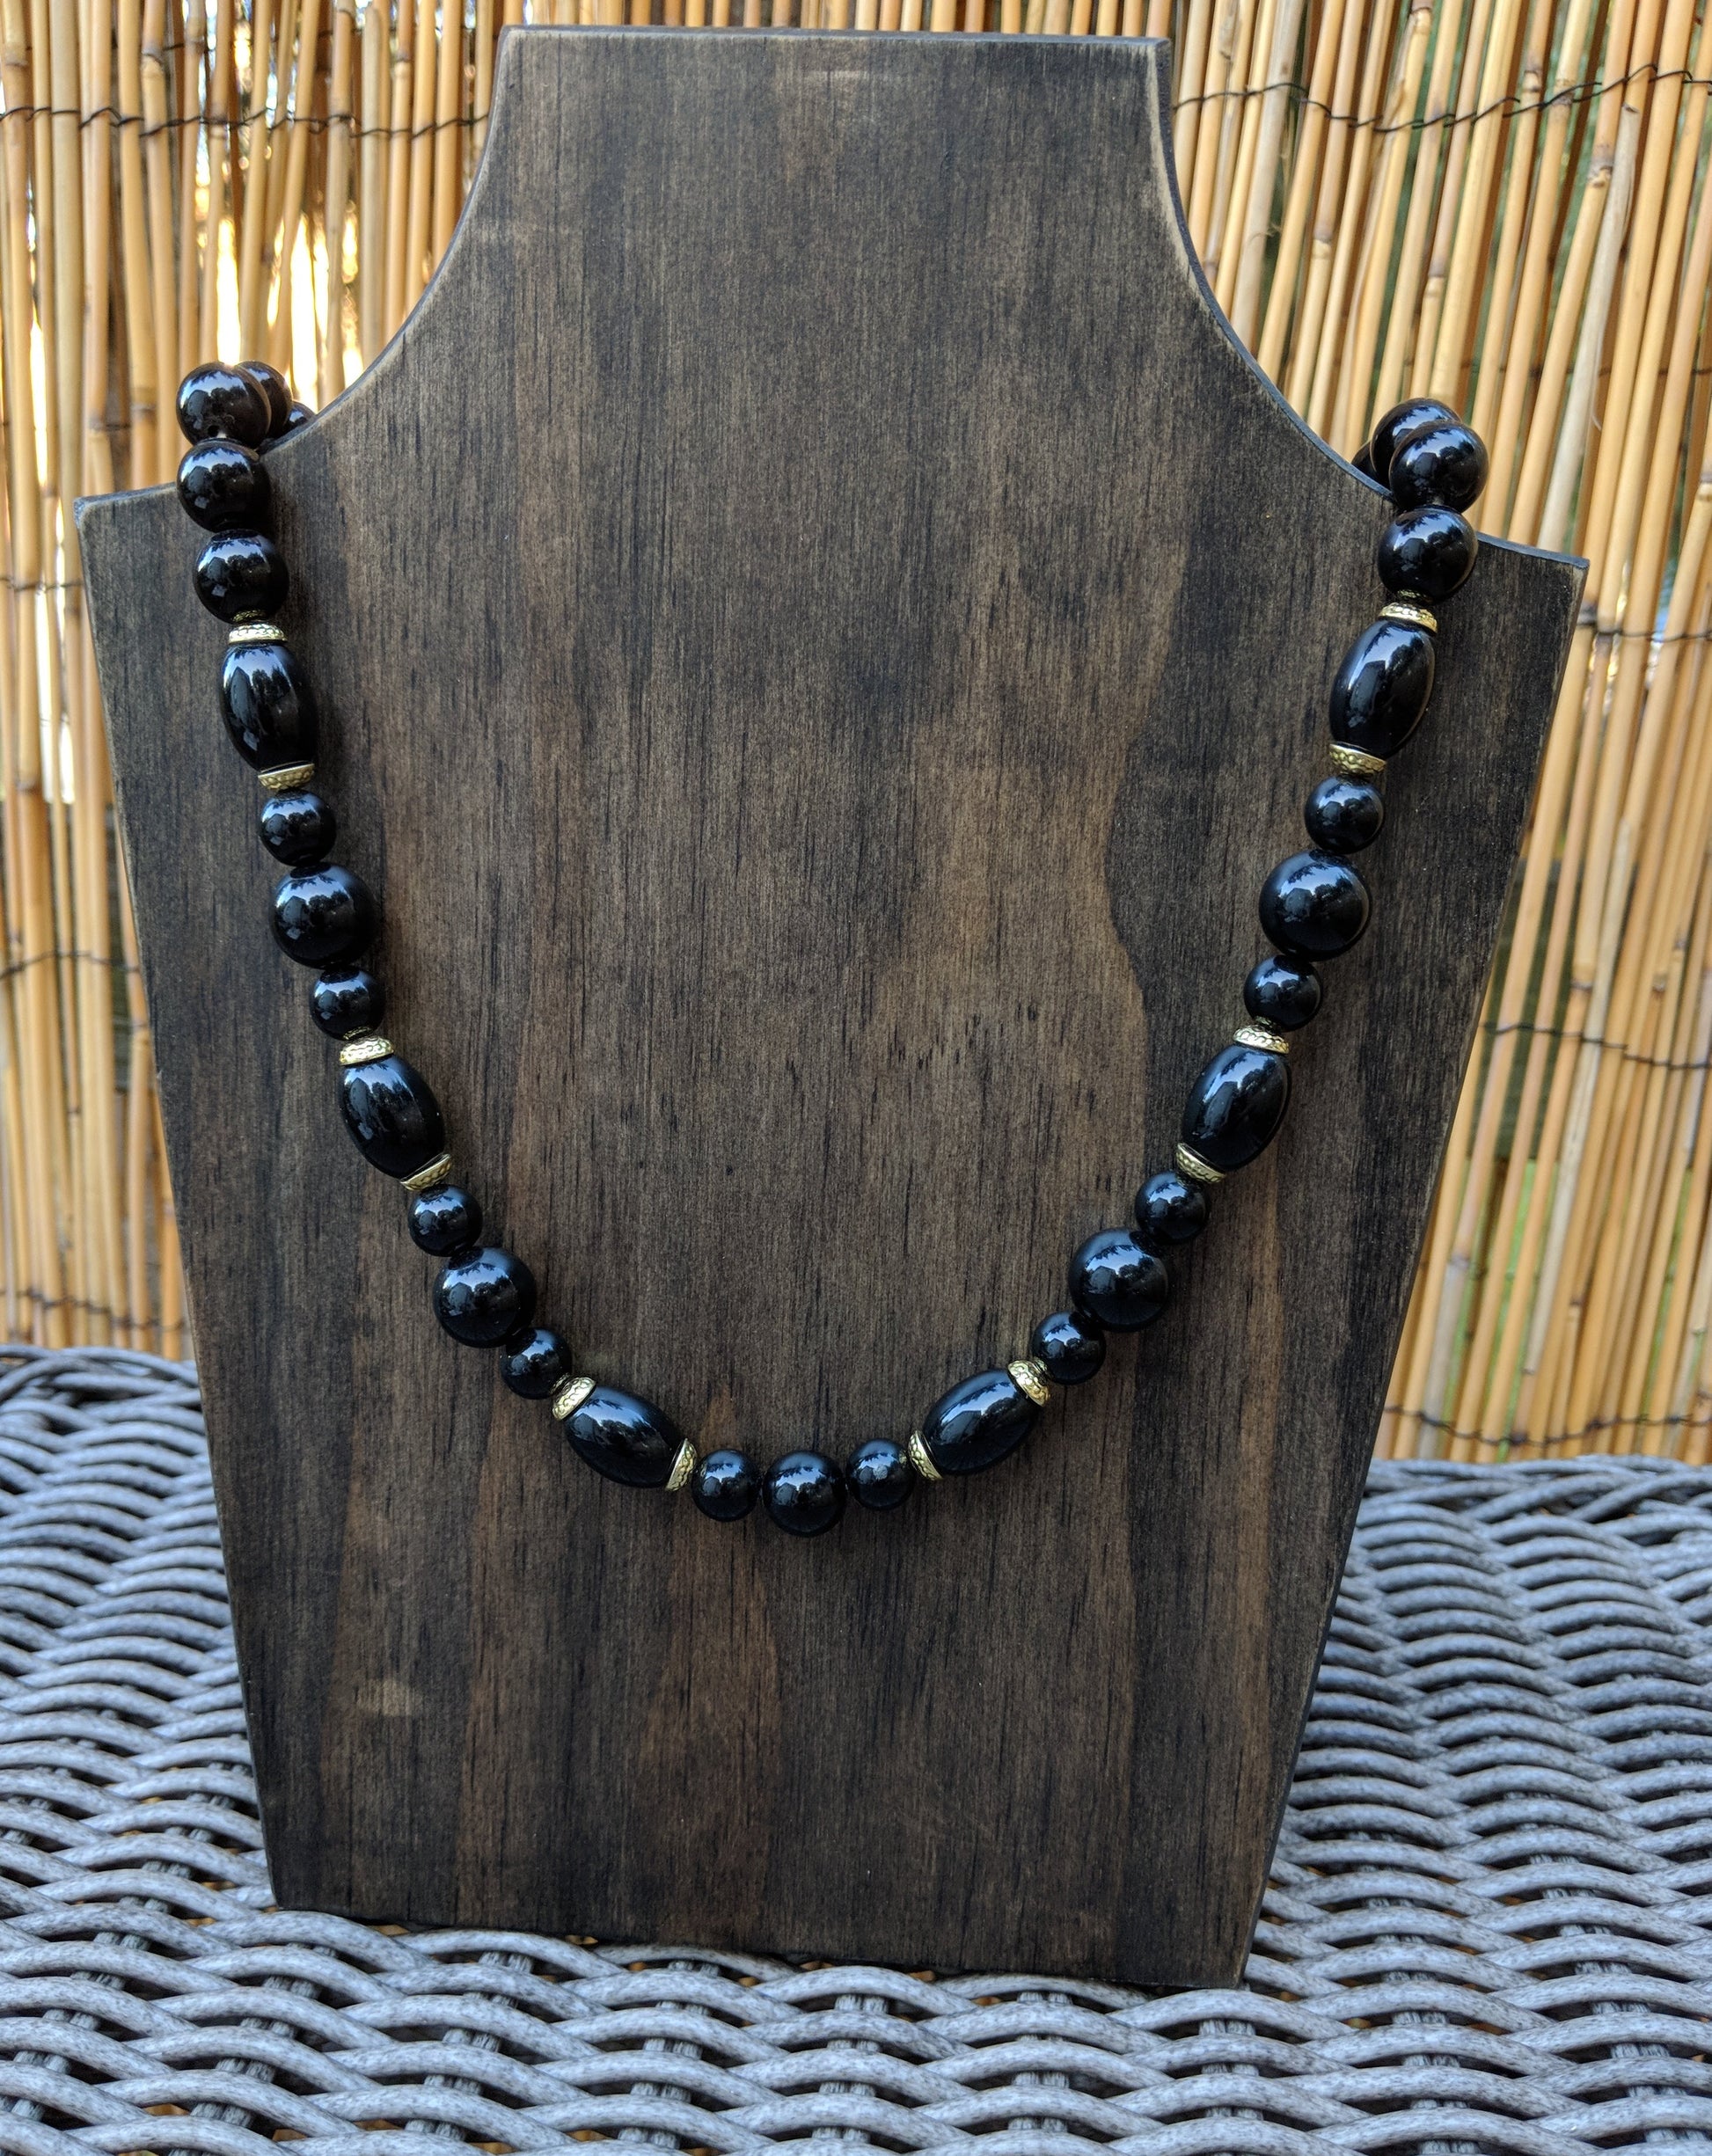 Vintage Black and Gold Beaded "20 Necklace